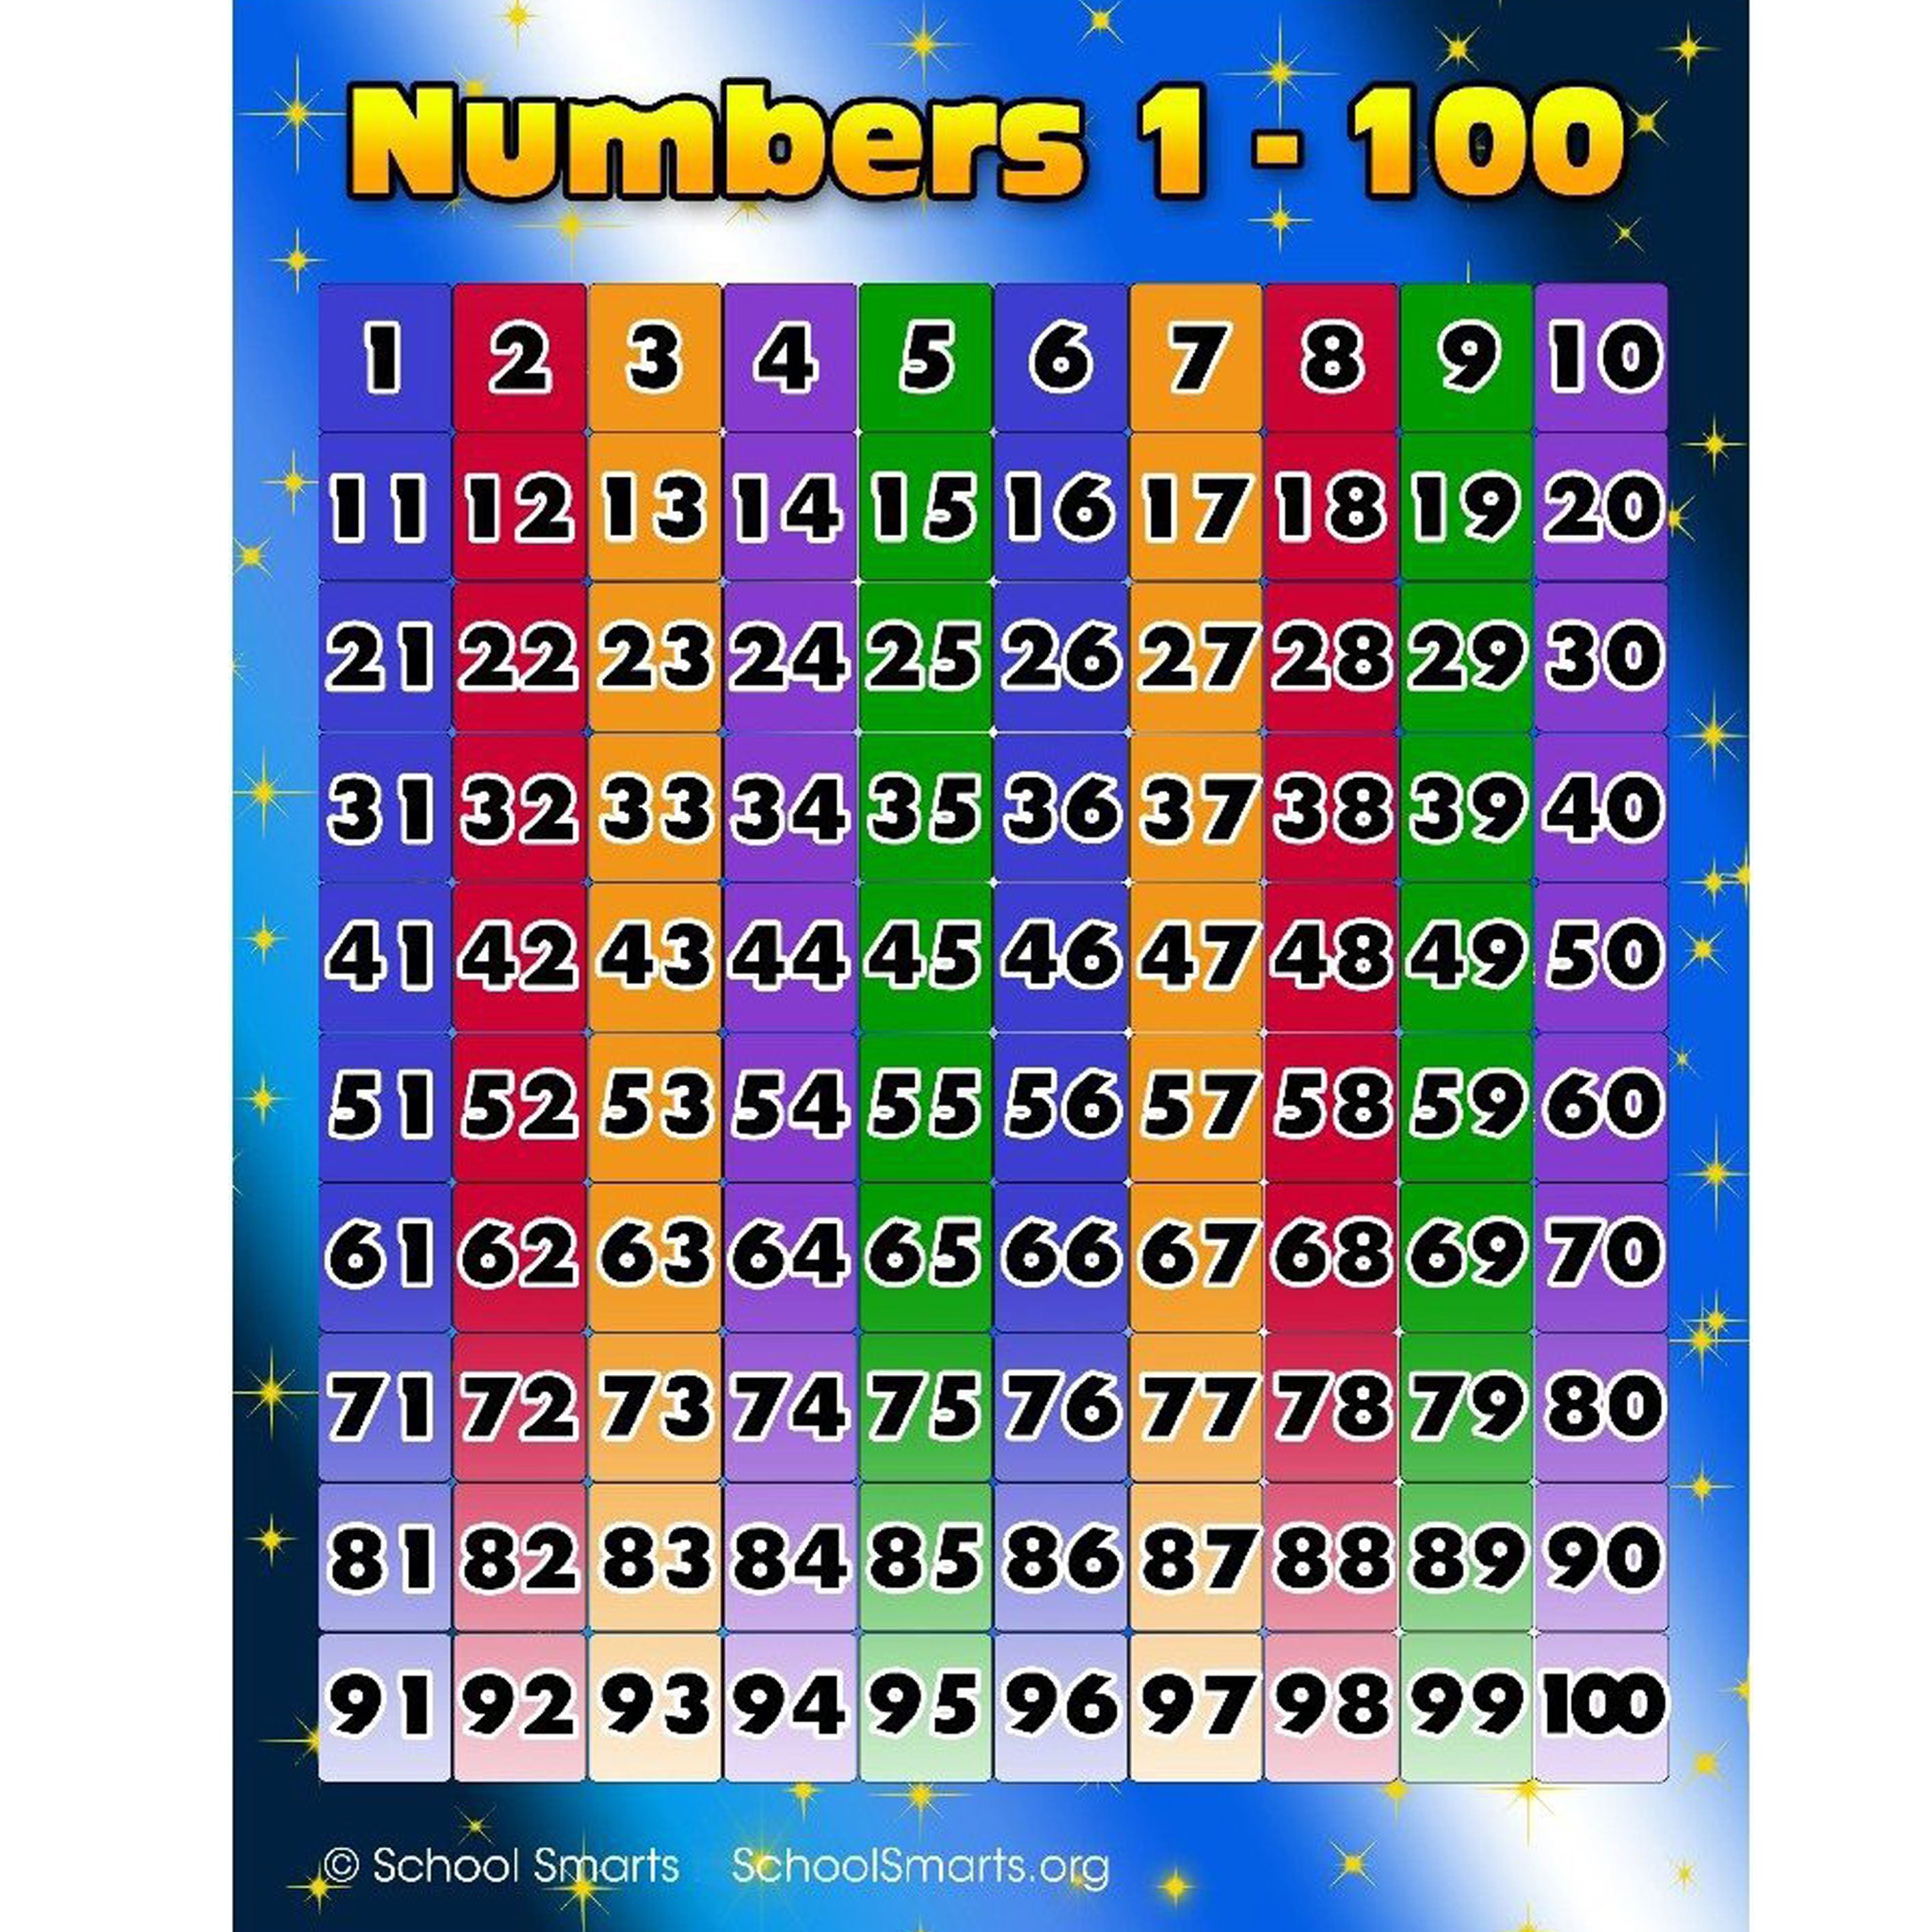 NUMBERS 1-100 CHART - Sangsters Bookstores